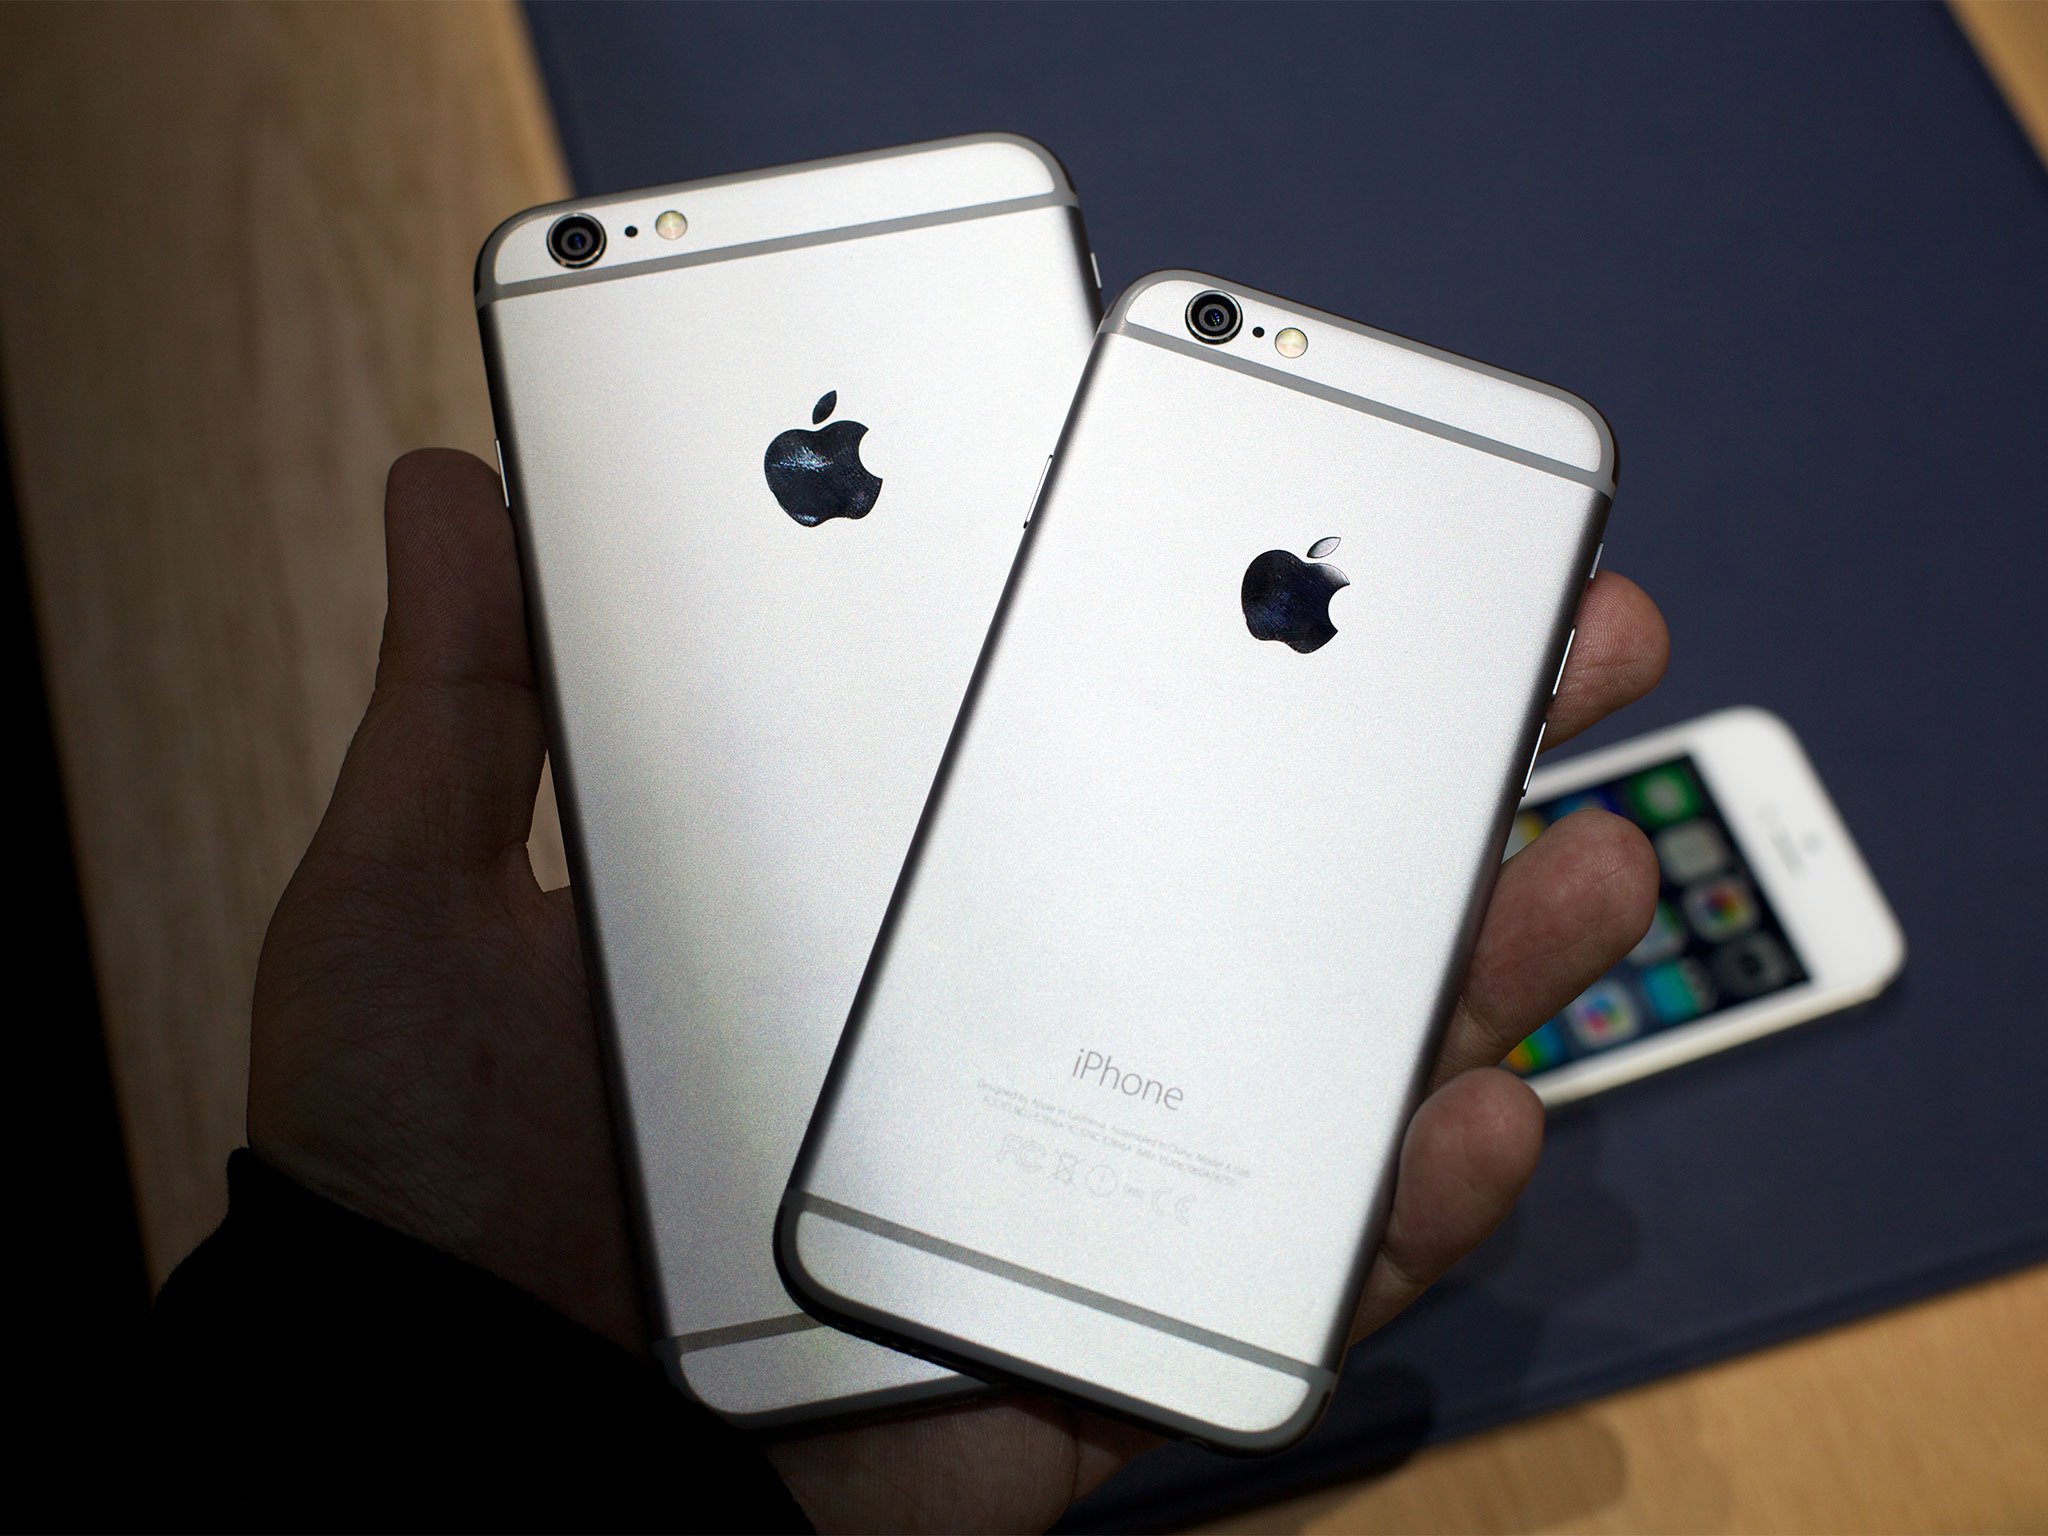 iPhone 6 and iPhone 6 Plus reviews